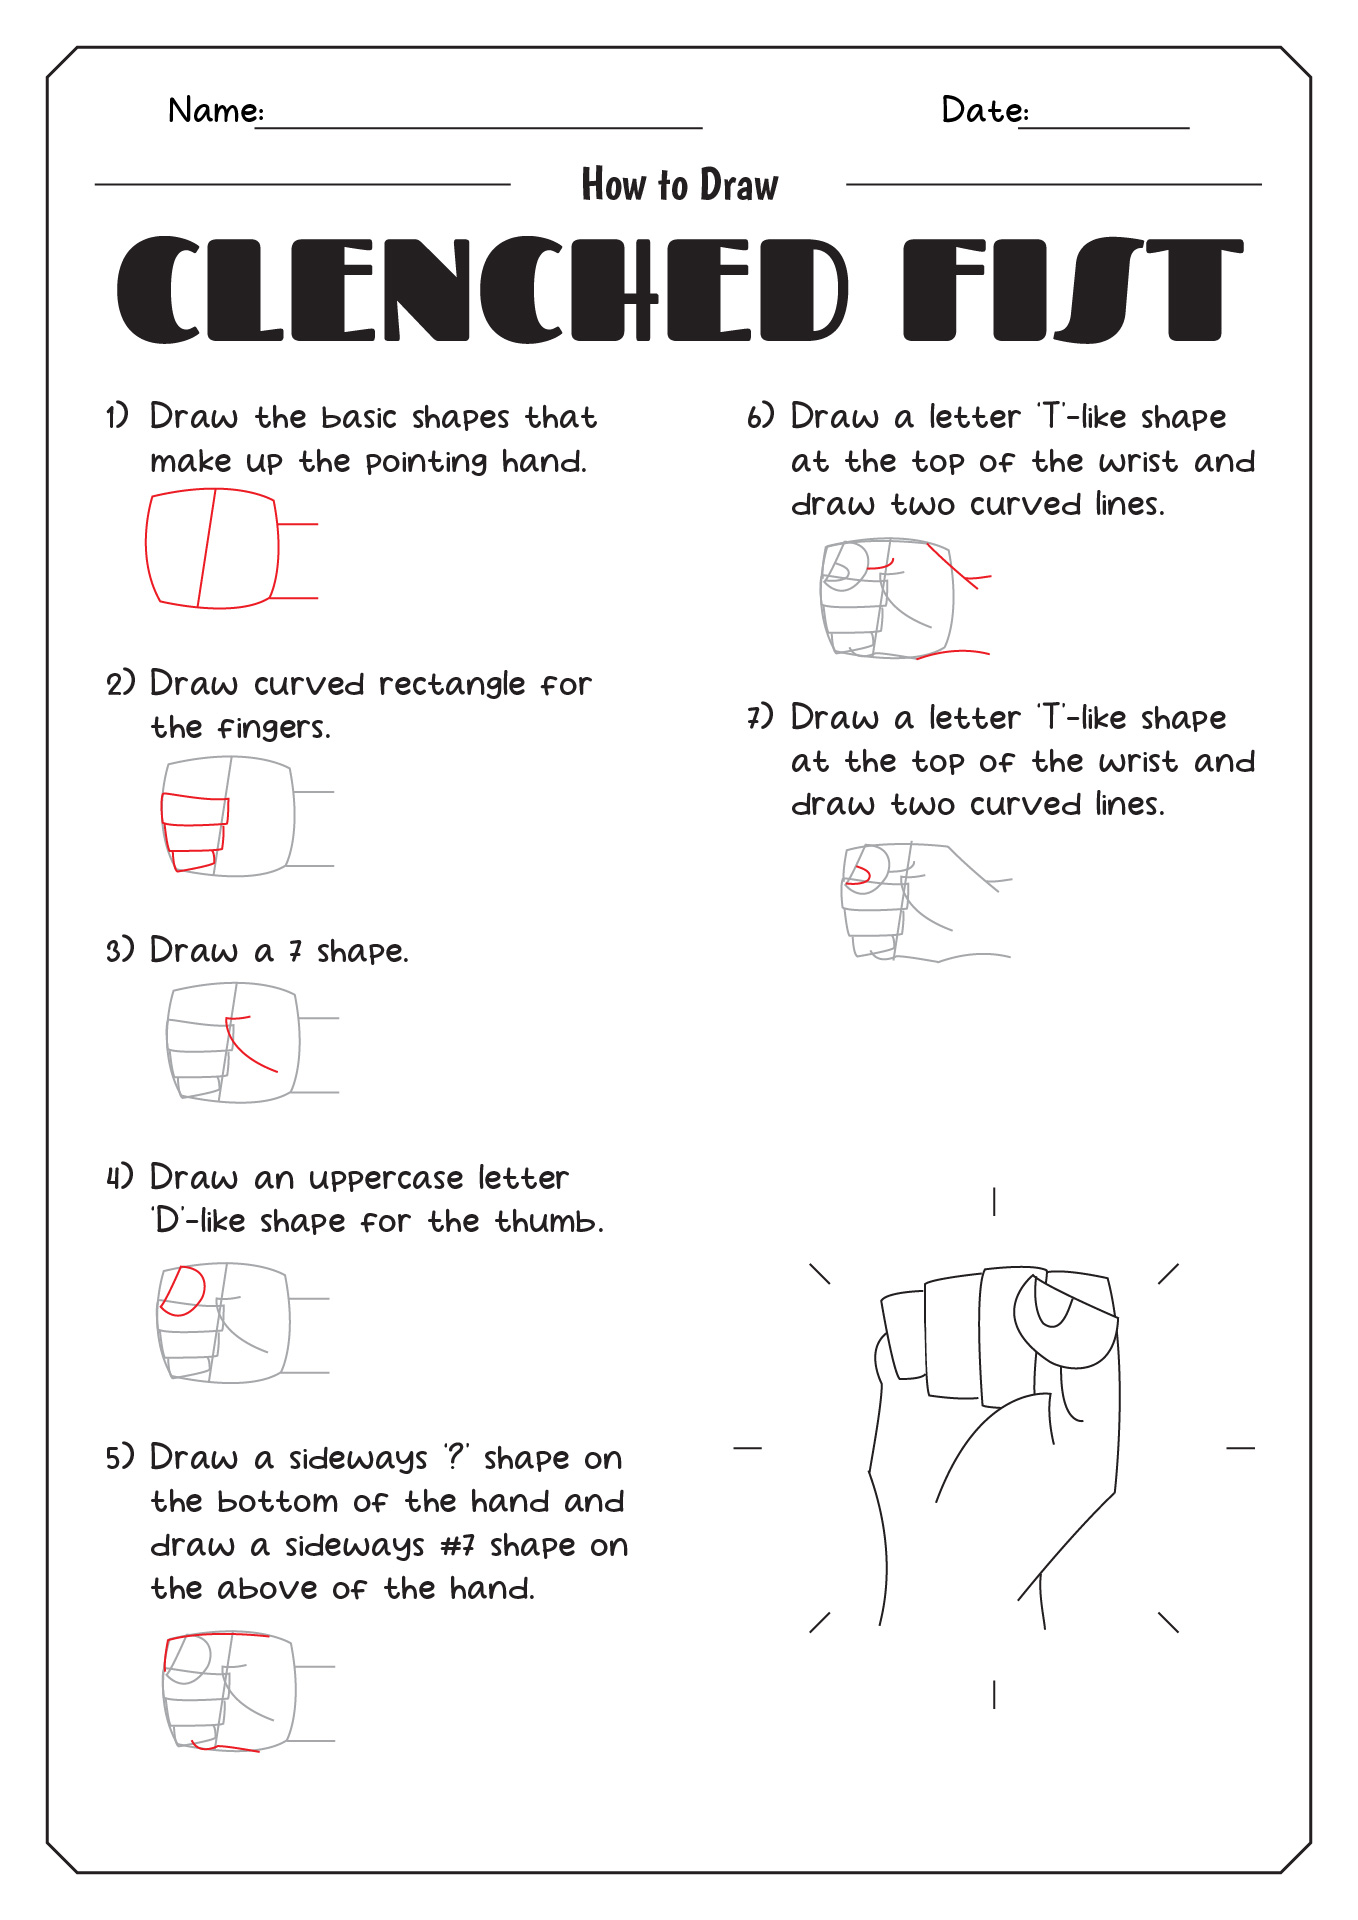 How to Draw Clenched Fist Image